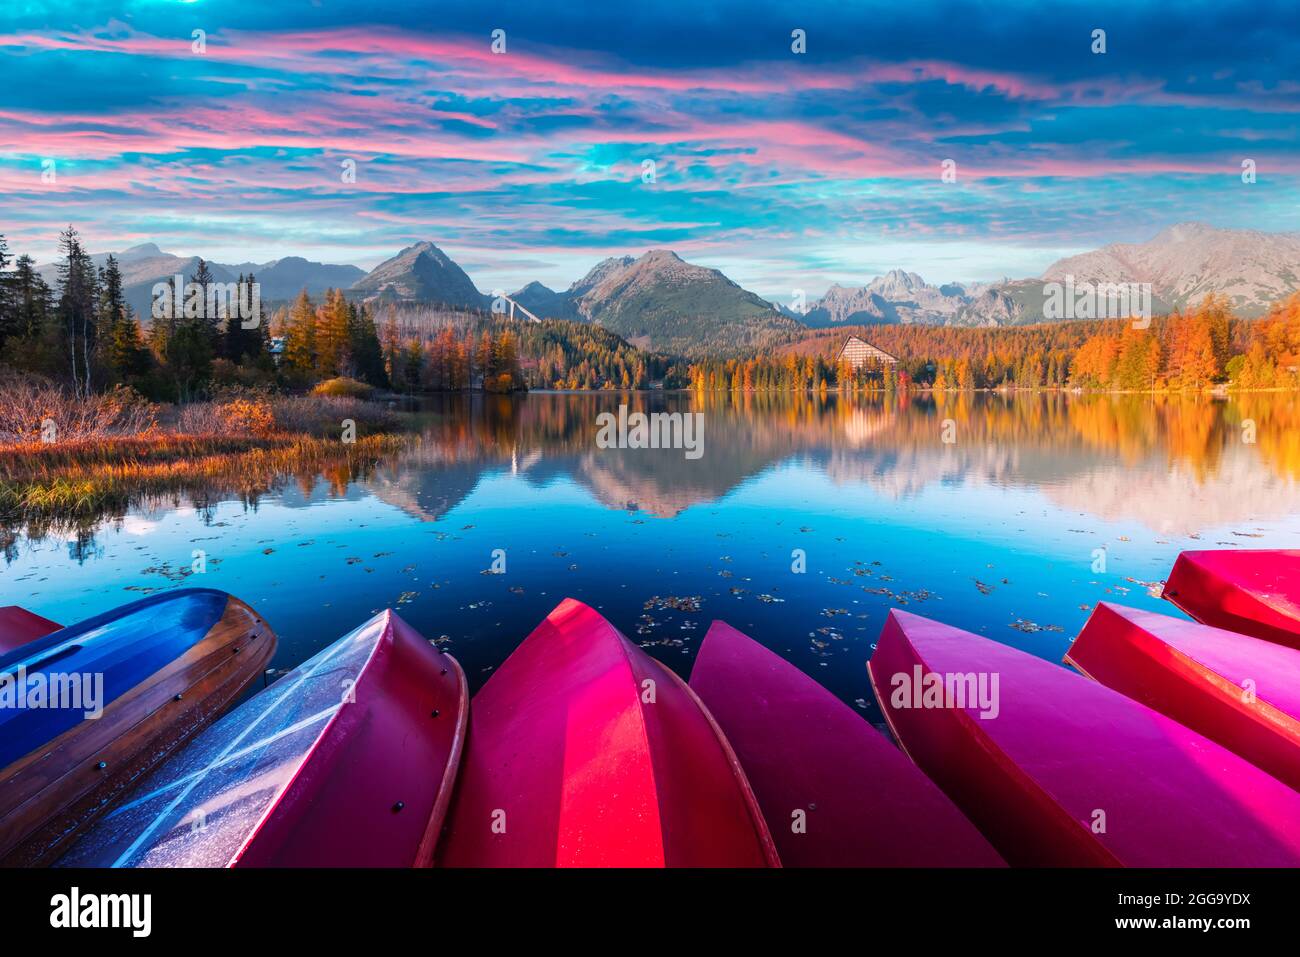 Picturesque autumn view of lake Strbske pleso in High Tatras National Park, Slovakia. Row of red wooden boats and high mountains on background. Landscape photography Stock Photo